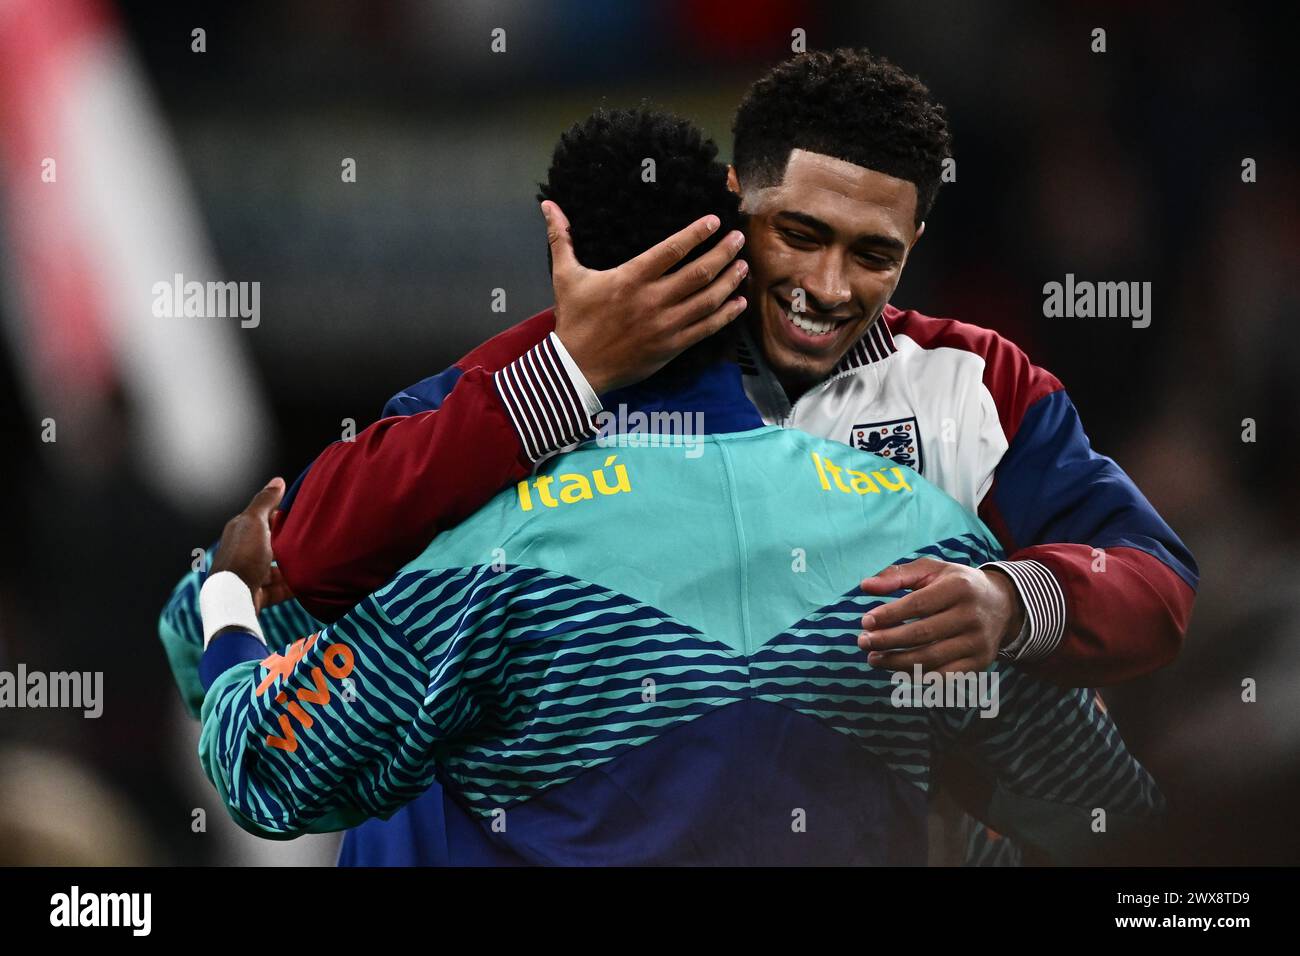 LONDON, ENGLAND - MARCH 23: Jude Bellingham of England and Vinicius Junior of Brazil before the international friendly match between England and Brazi Stock Photo